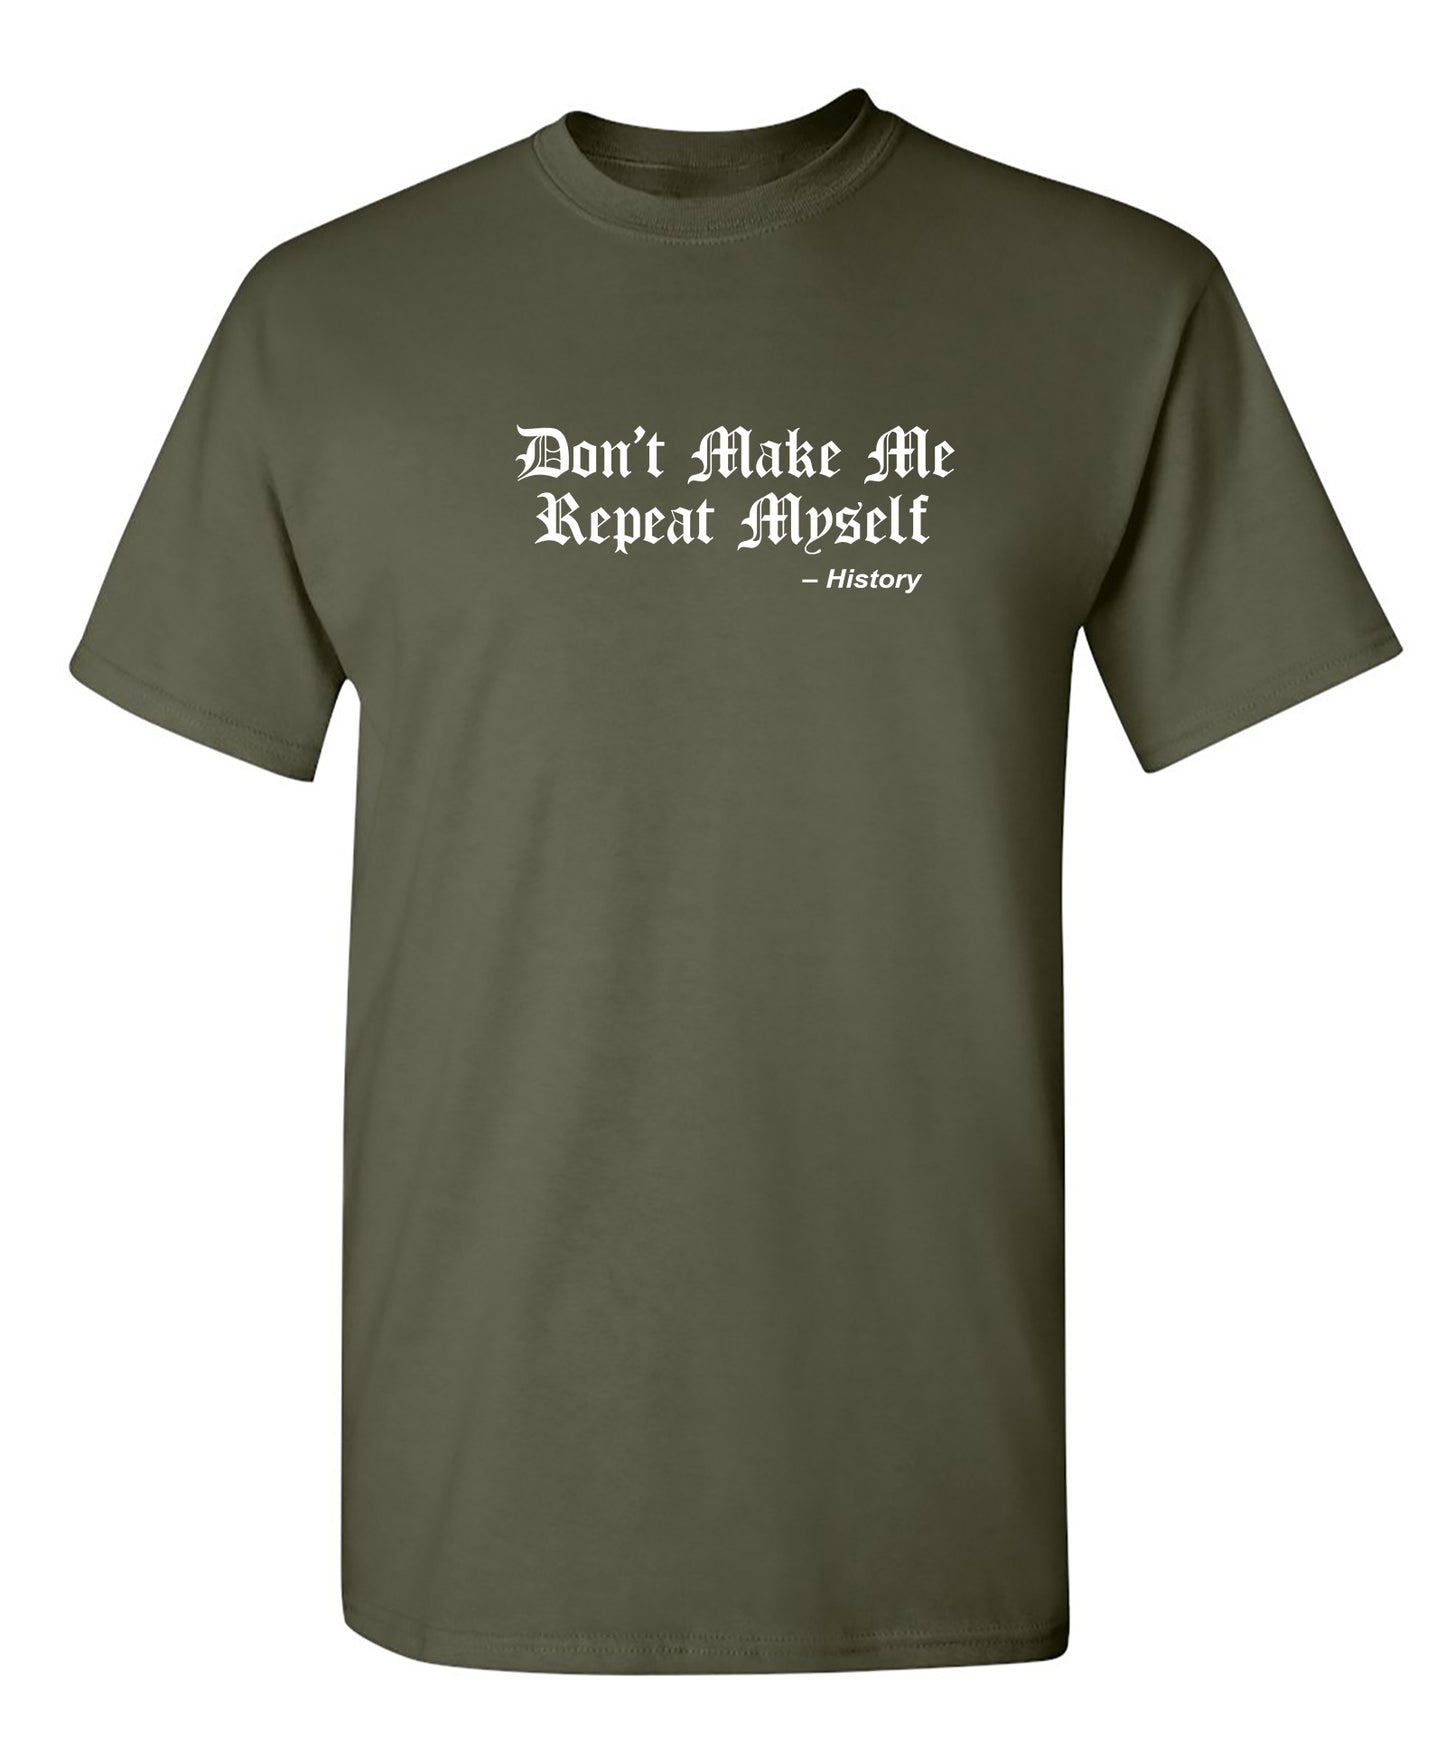 Don't Make Me Repeat Myself -History - Funny T Shirts & Graphic Tees